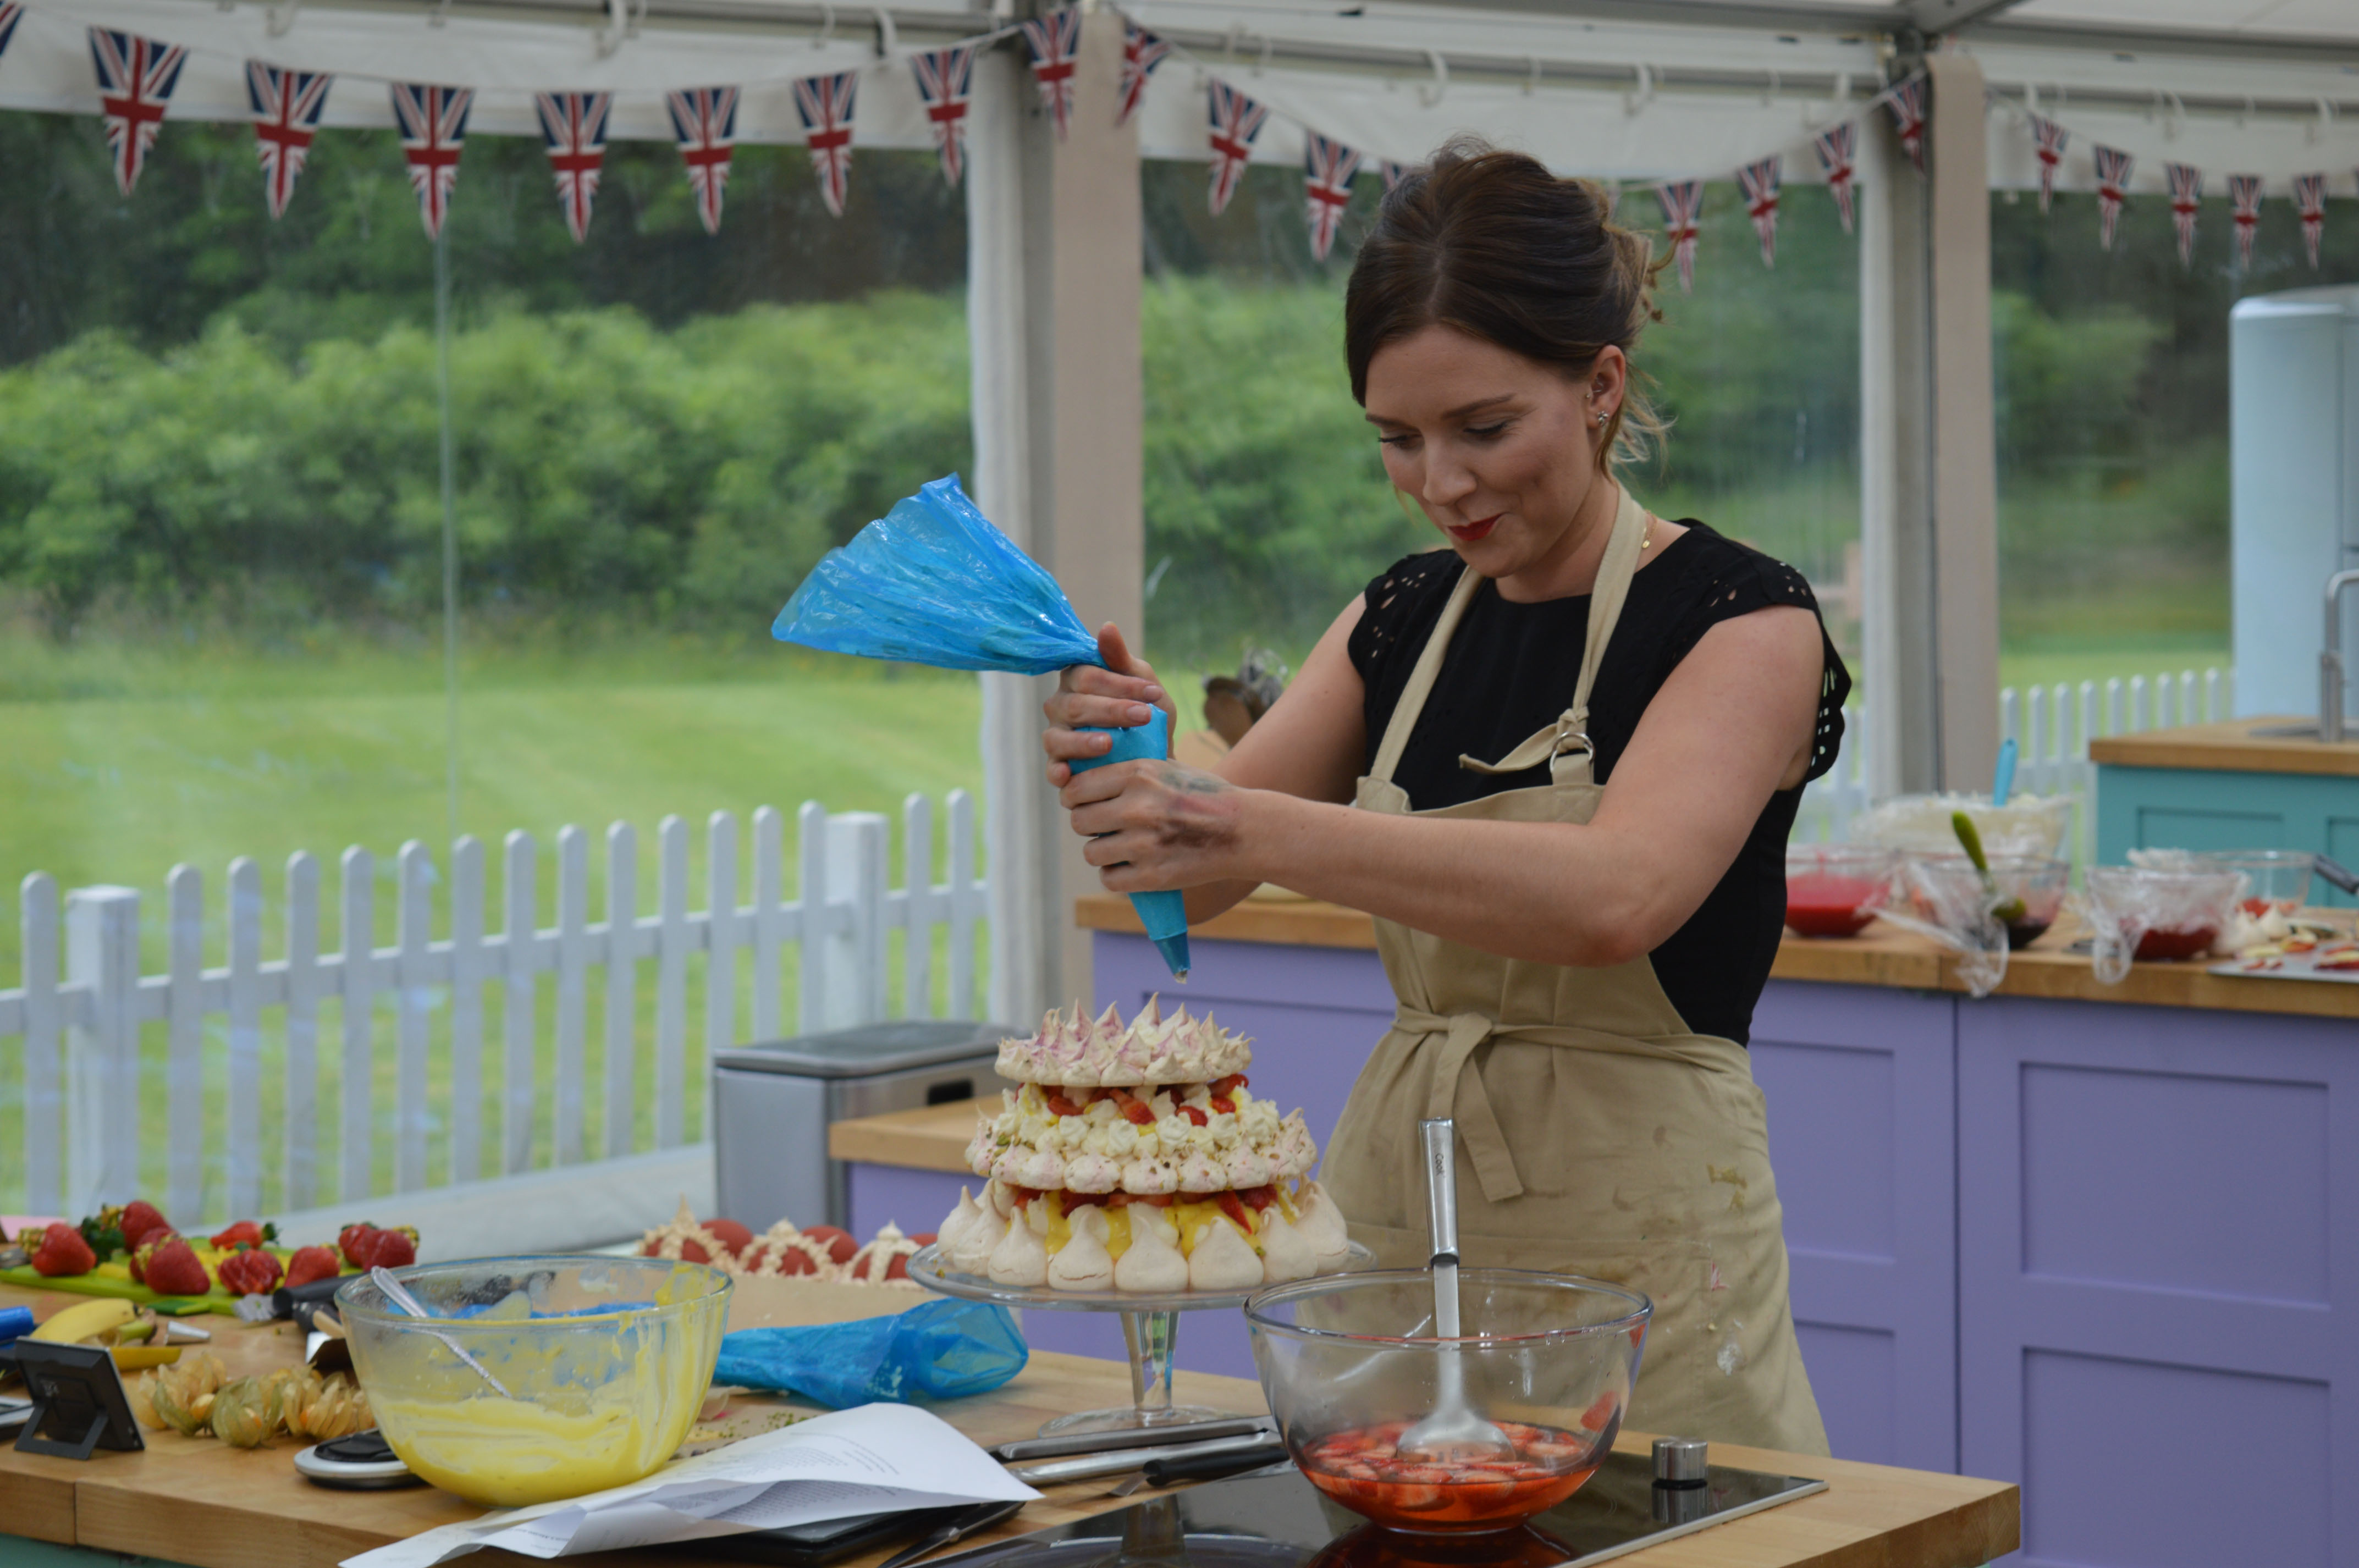 Last night, after a gruelling ten-week competition, the seventh season of the Great British Bake Off was won by Candice Brown (pictured), a 31-year-old phys. ed. teacher from Bedfordshire (TBC—BBC/Love Productions)